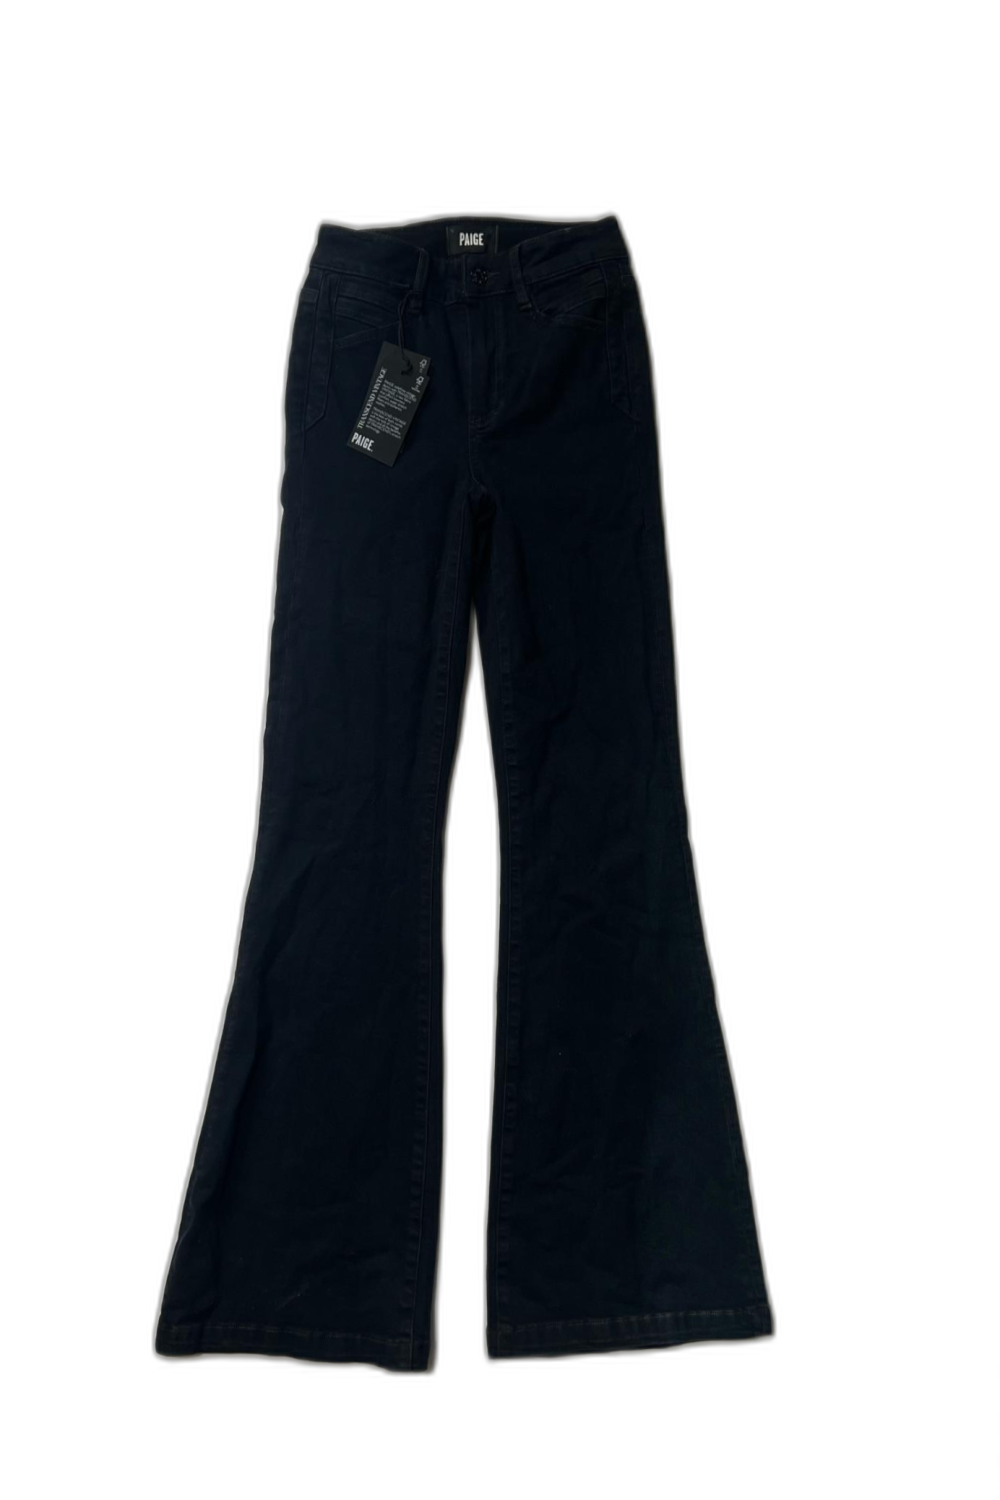 Paige - Wide Leg Jeans New with Tags!